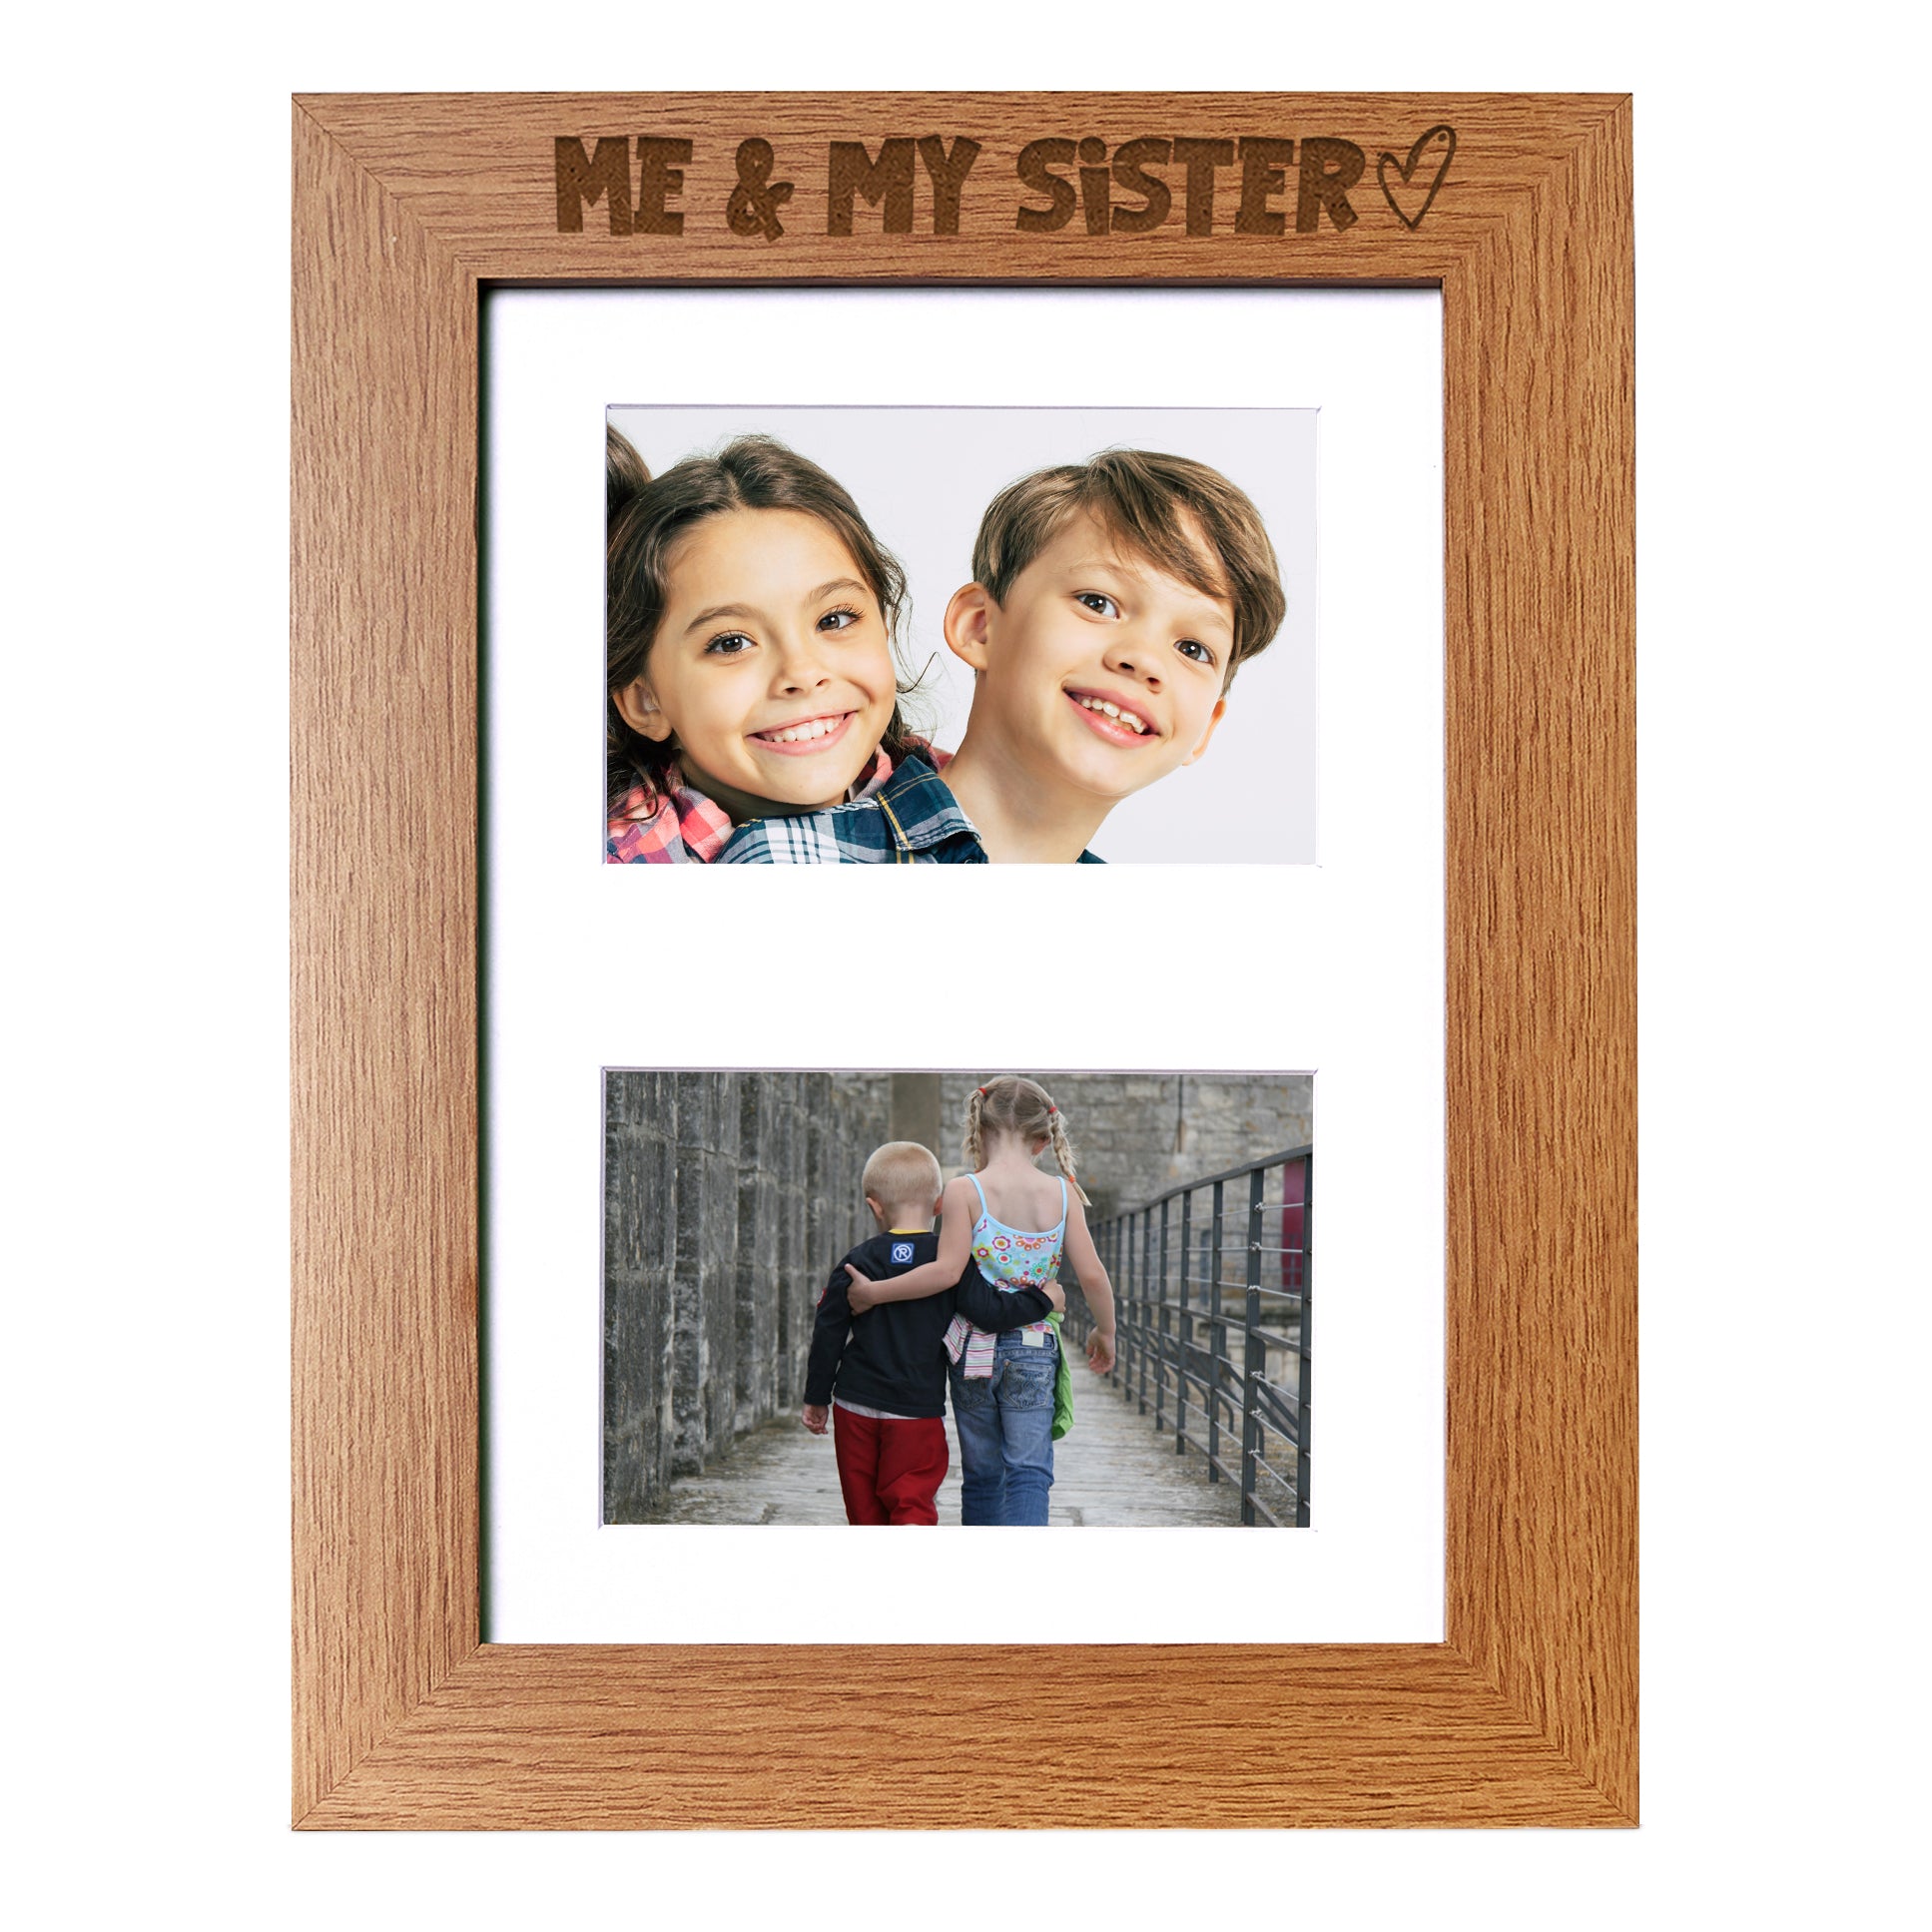 Me and My Sister Photo Picture Frame Double 6x4 Inch Landscape